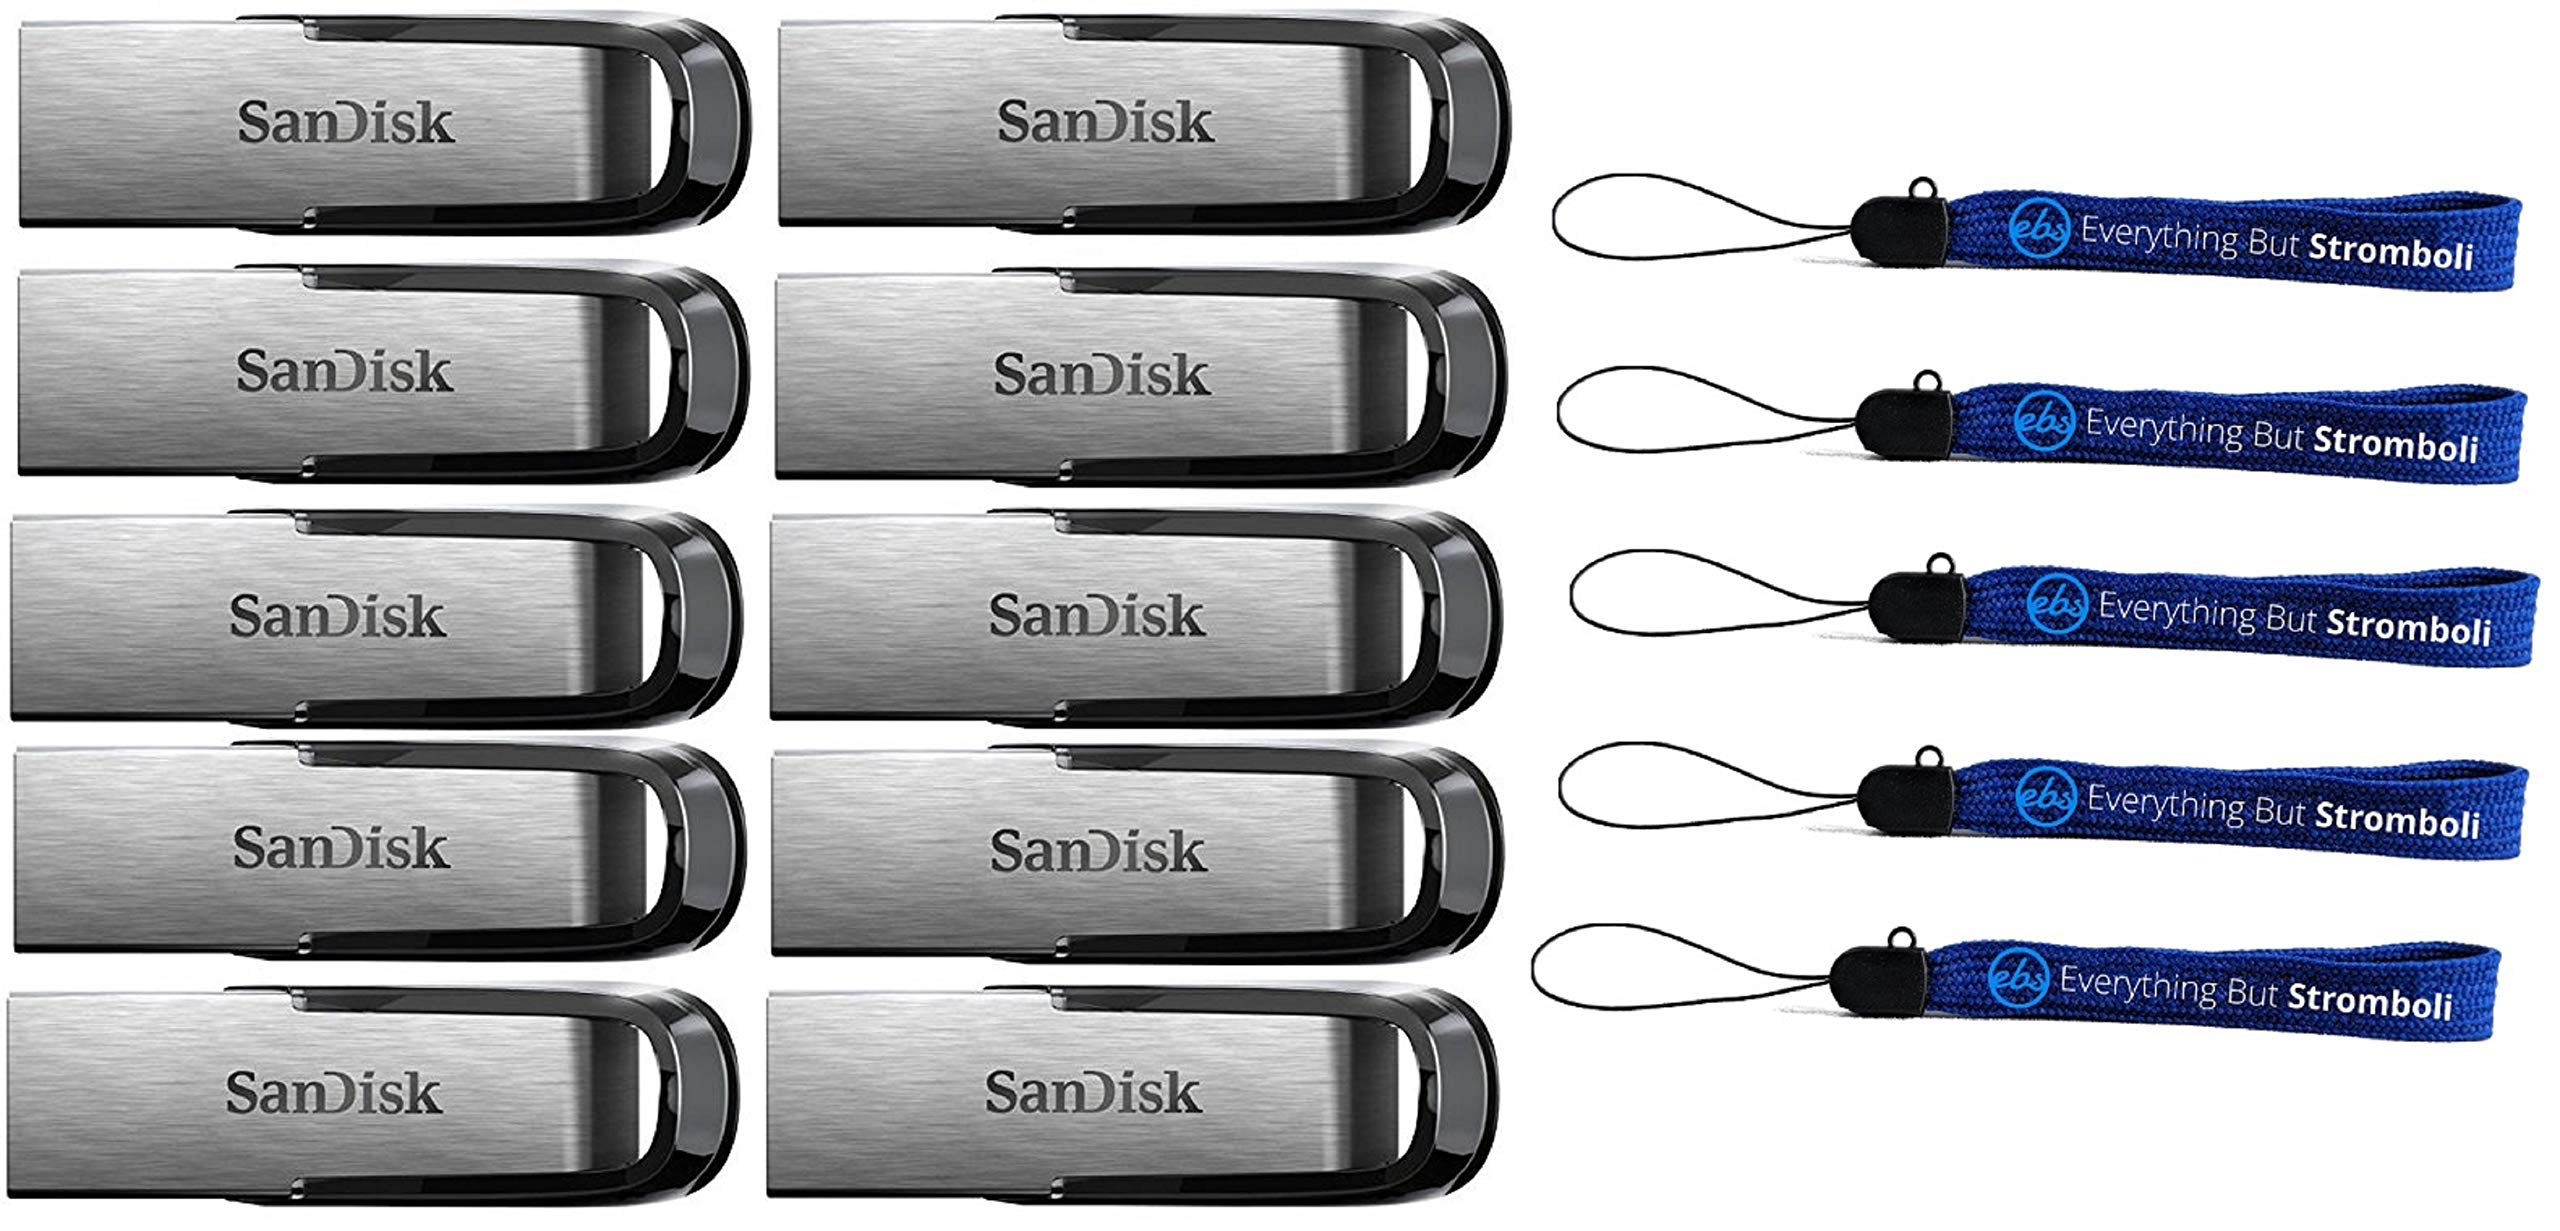 SanDisk Ultra Flair USB 10 Pack 3.0 32GB Flash Drive High Performance Jump DriveThumb DrivePen Drive up to 130MBs - with